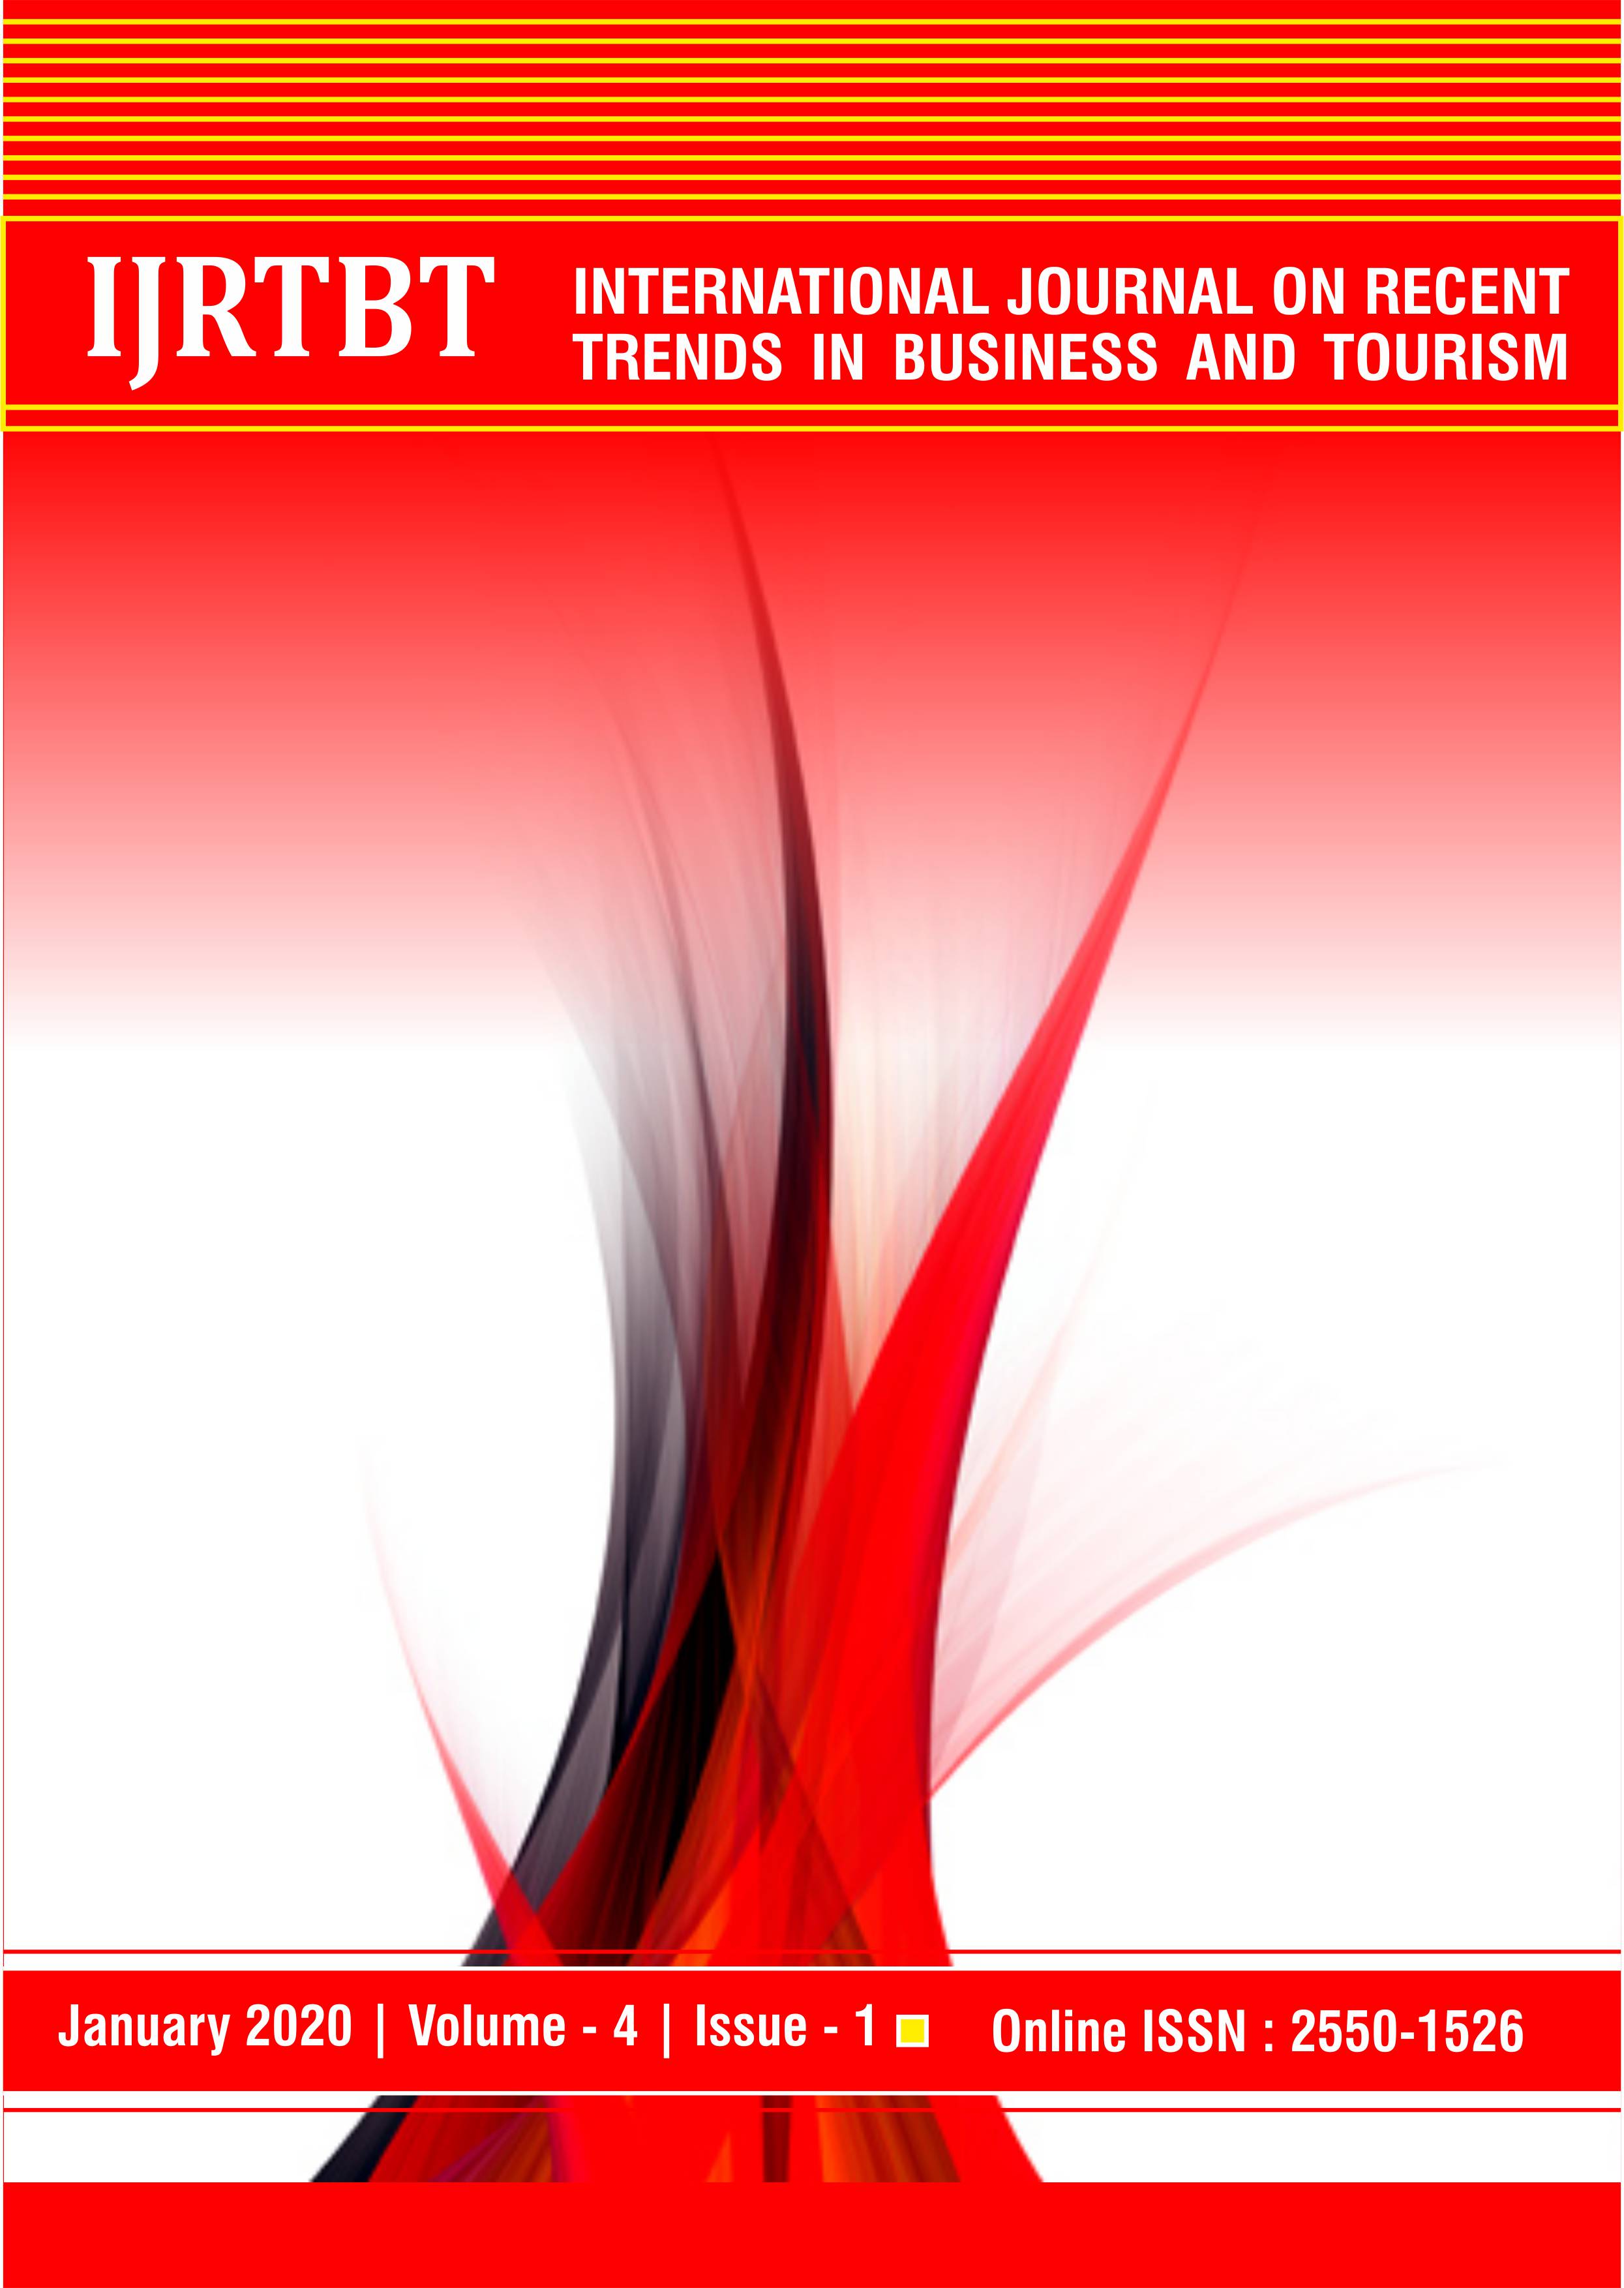 					View Vol. 4 No. 1 (2020): International Journal on Recent Trends in Business and Tourism
				